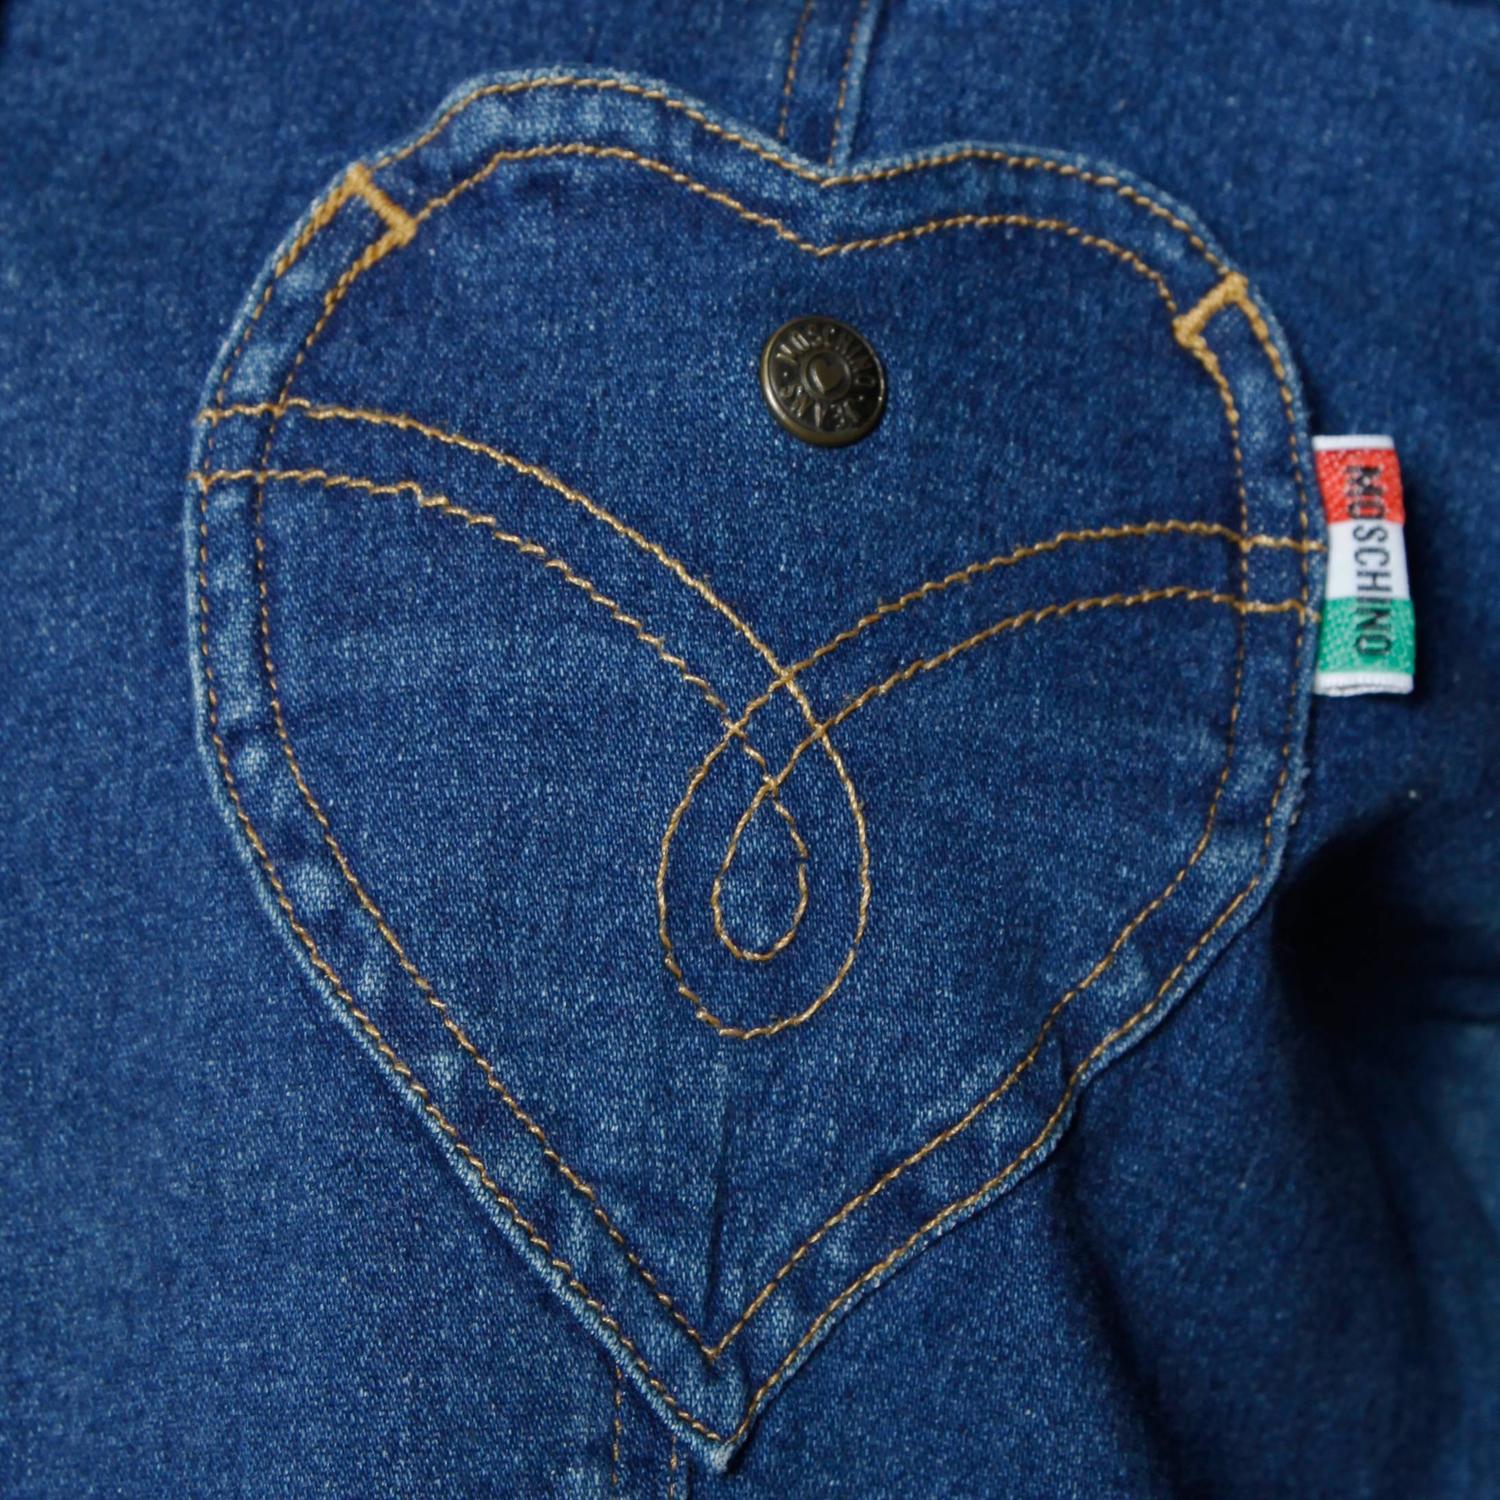 Moschino Jeans Vintage Denim Top or Jacket with Heart Pocket at 1stdibs